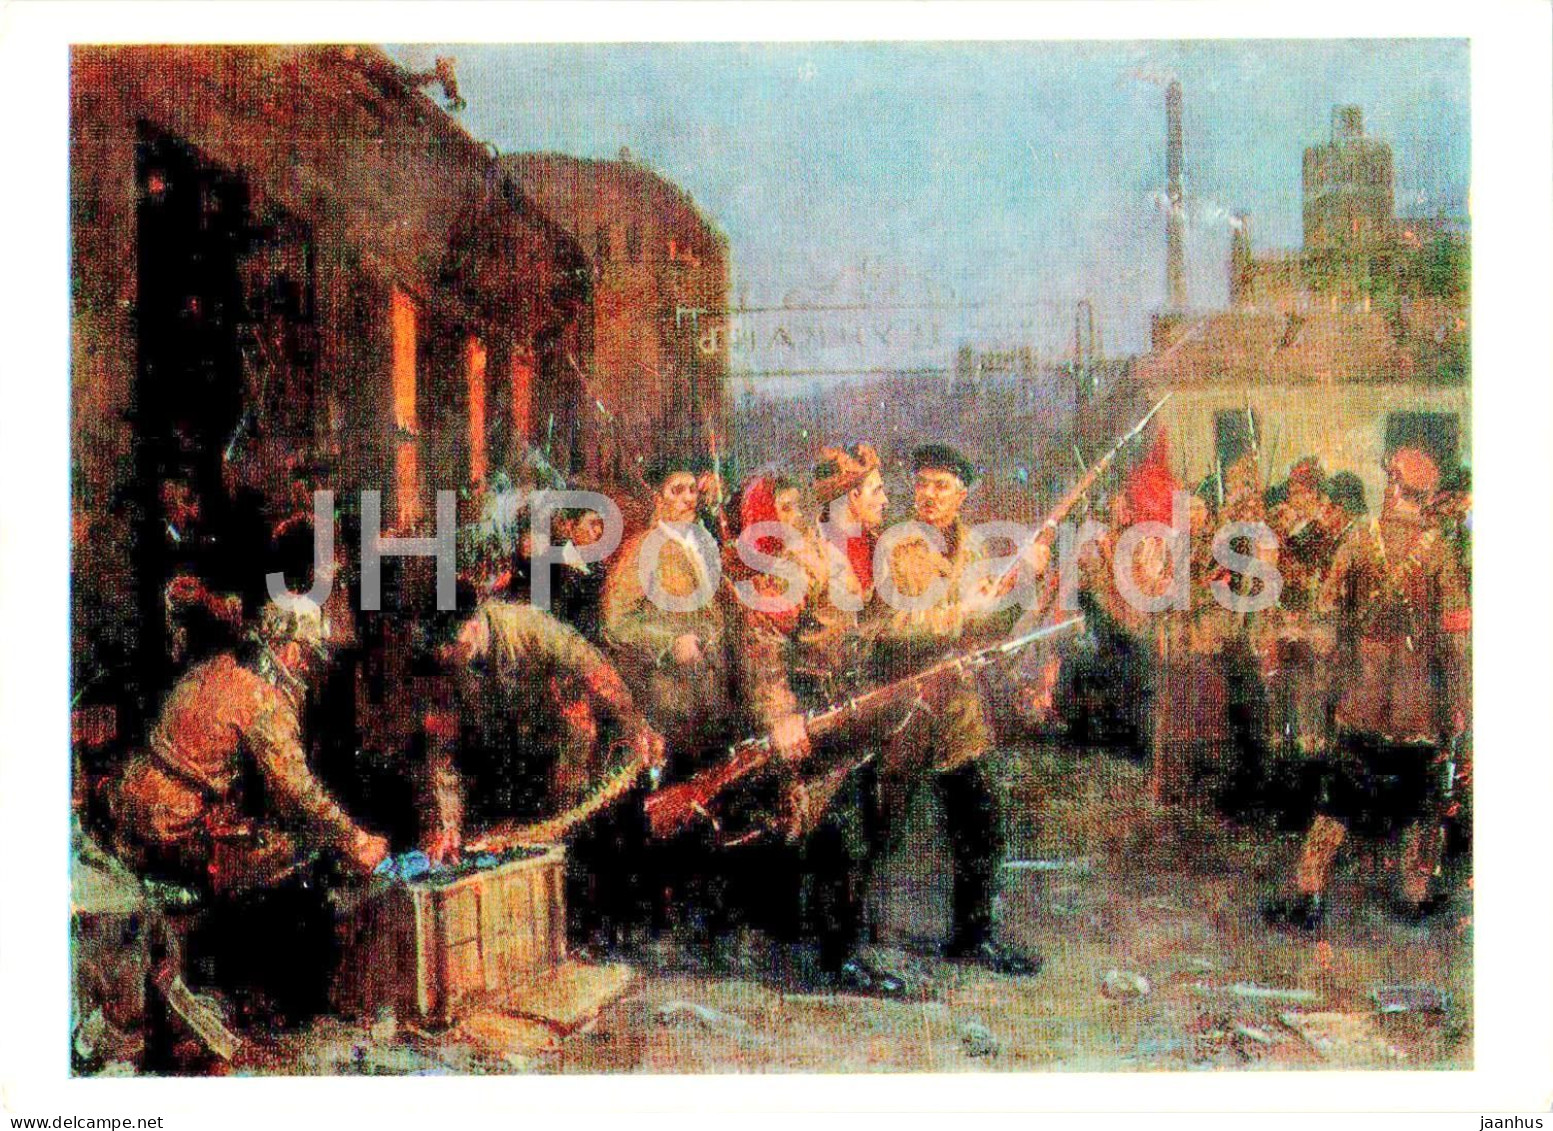 Painting By S. Levenkov - The Uprising Has Begun . October 1917 - Revolution - Russian Art - 1978 - Russia USSR - Unused - Paintings